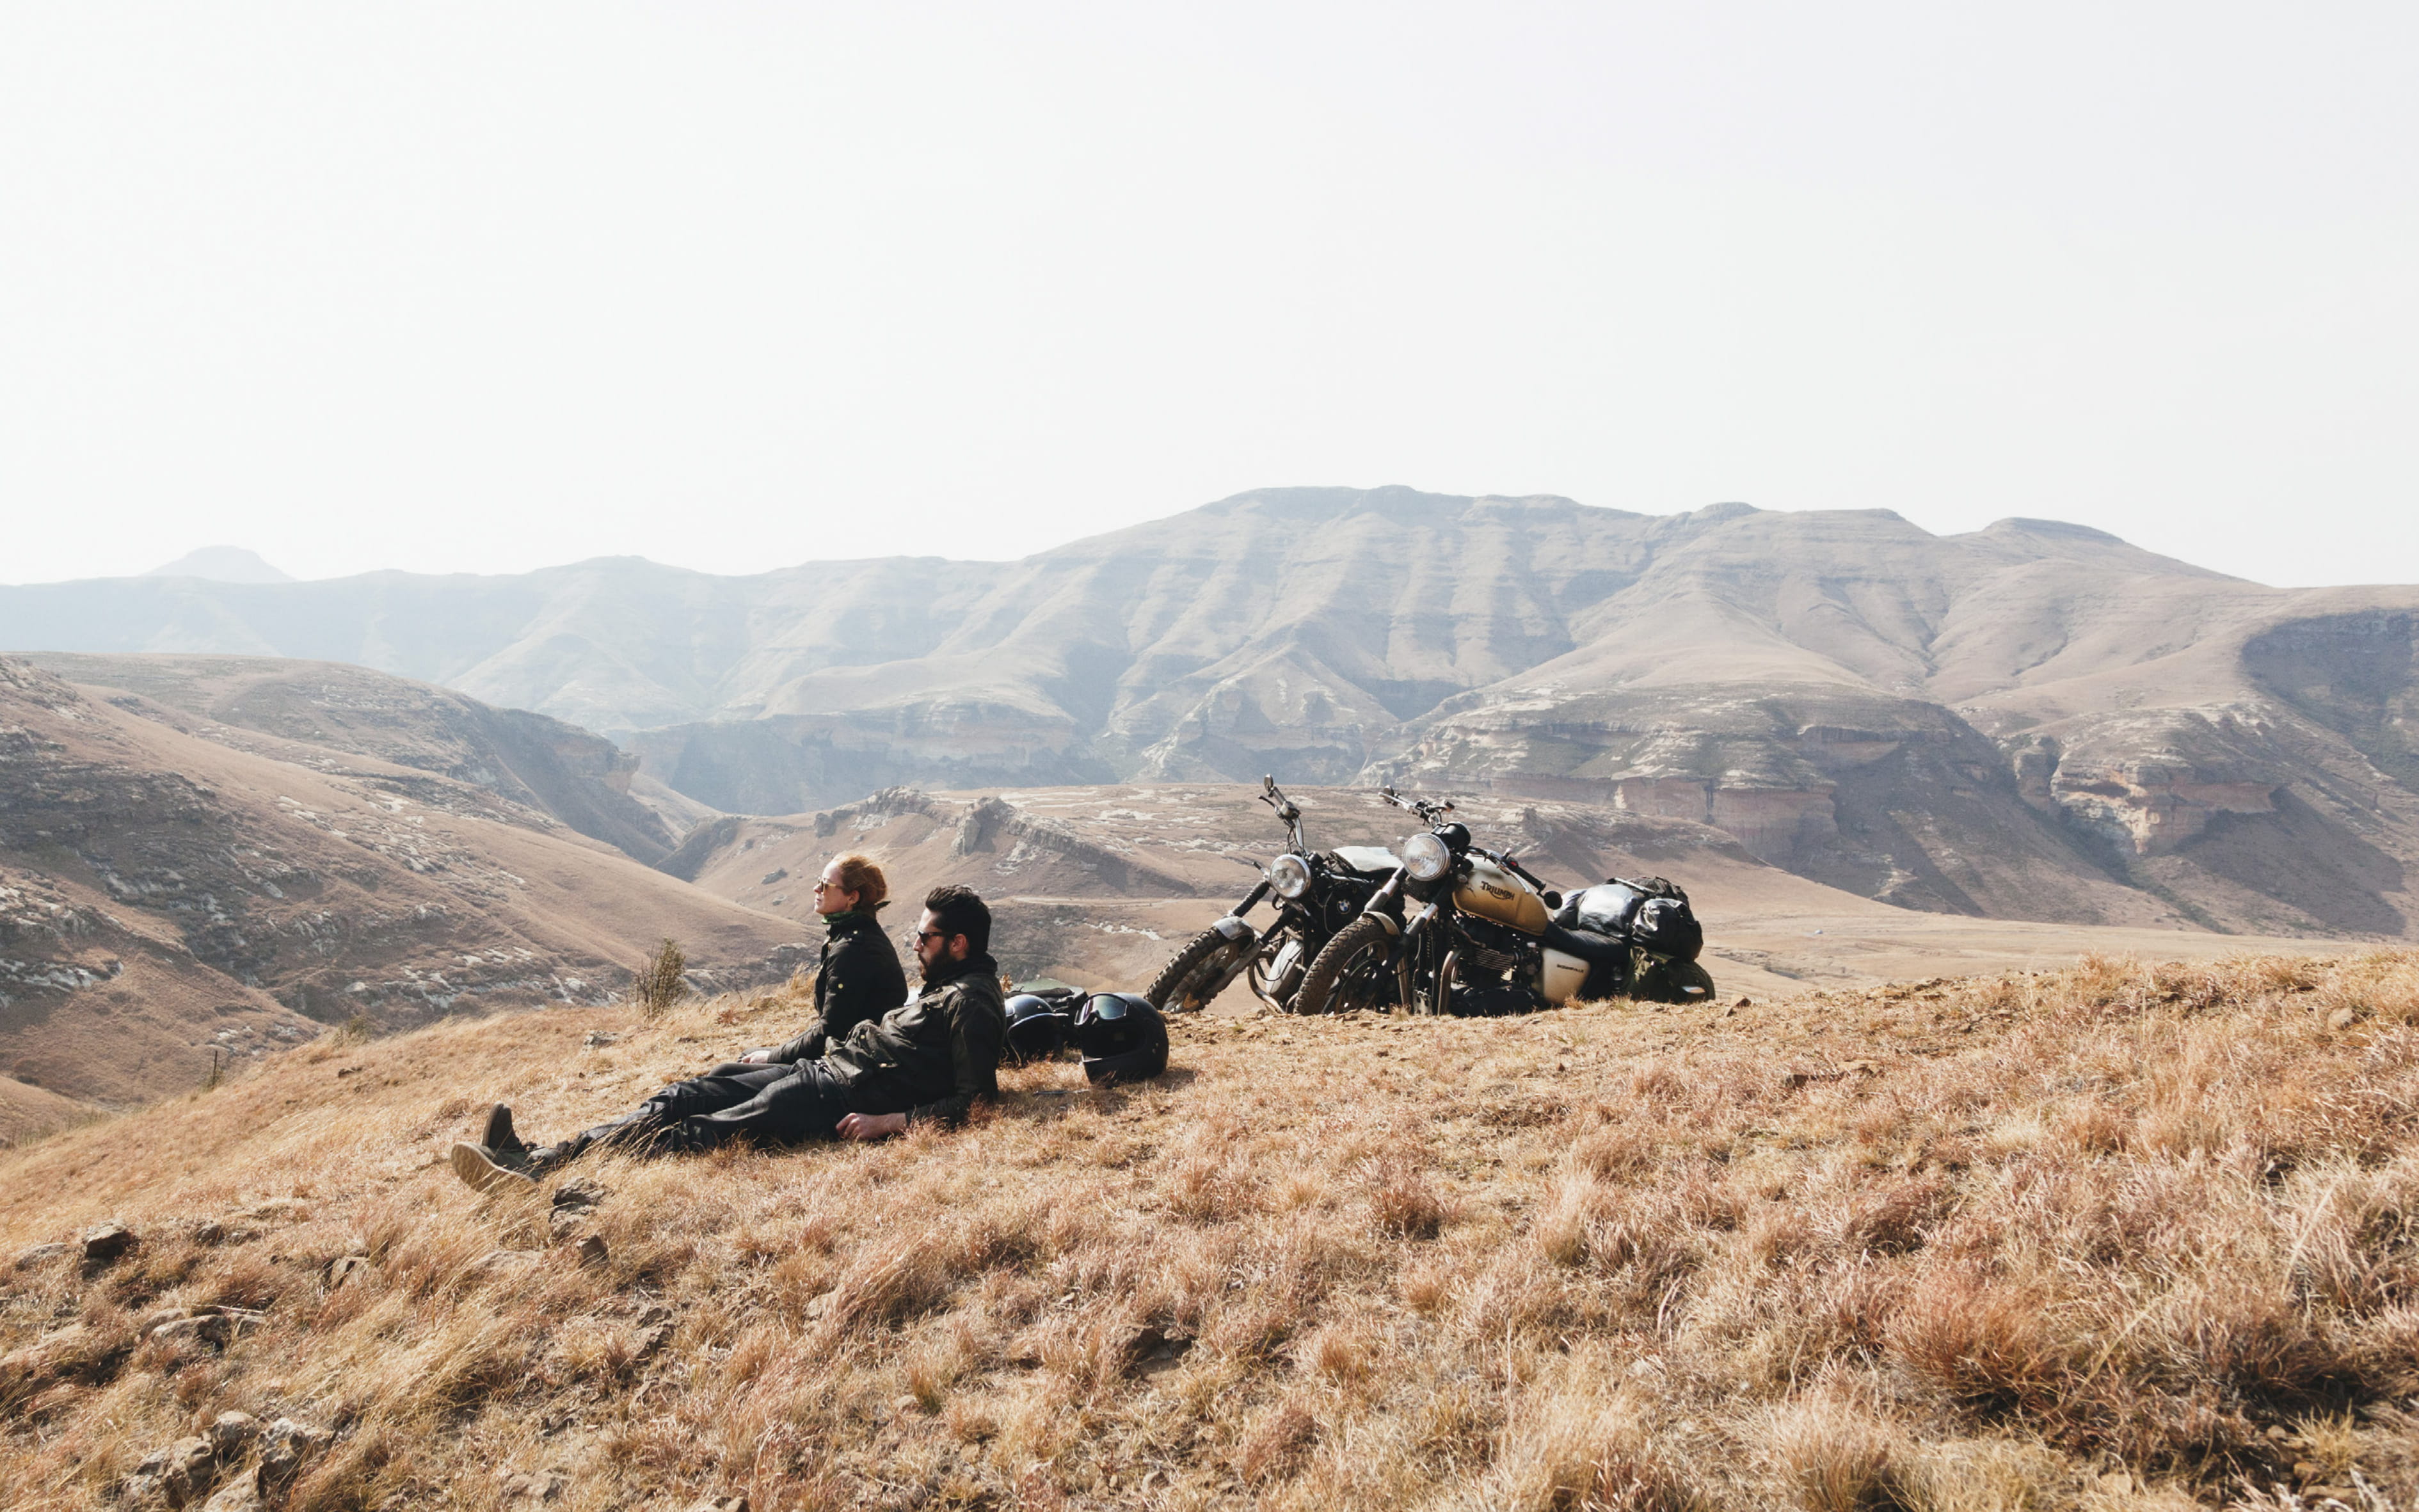 From Ride Out! Motorcycle Roadtrips and Adventures copyright Gestalten 2018